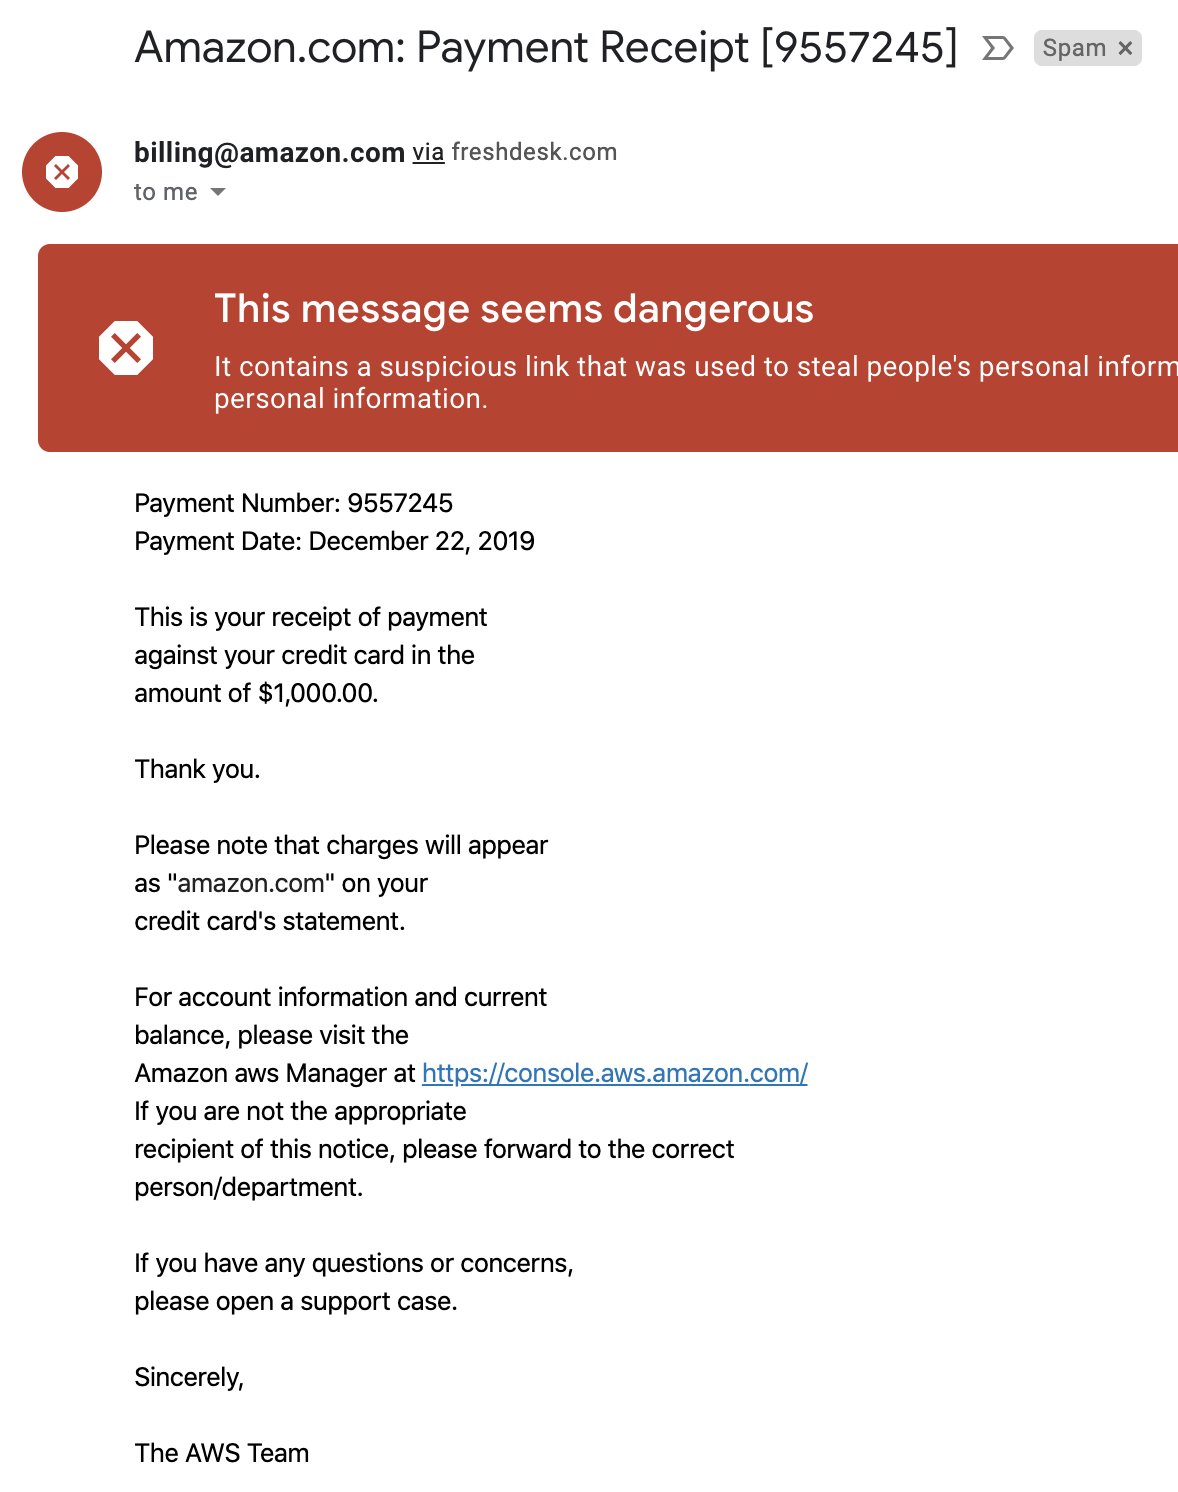 Amazon $1000 payment spam email screenshot